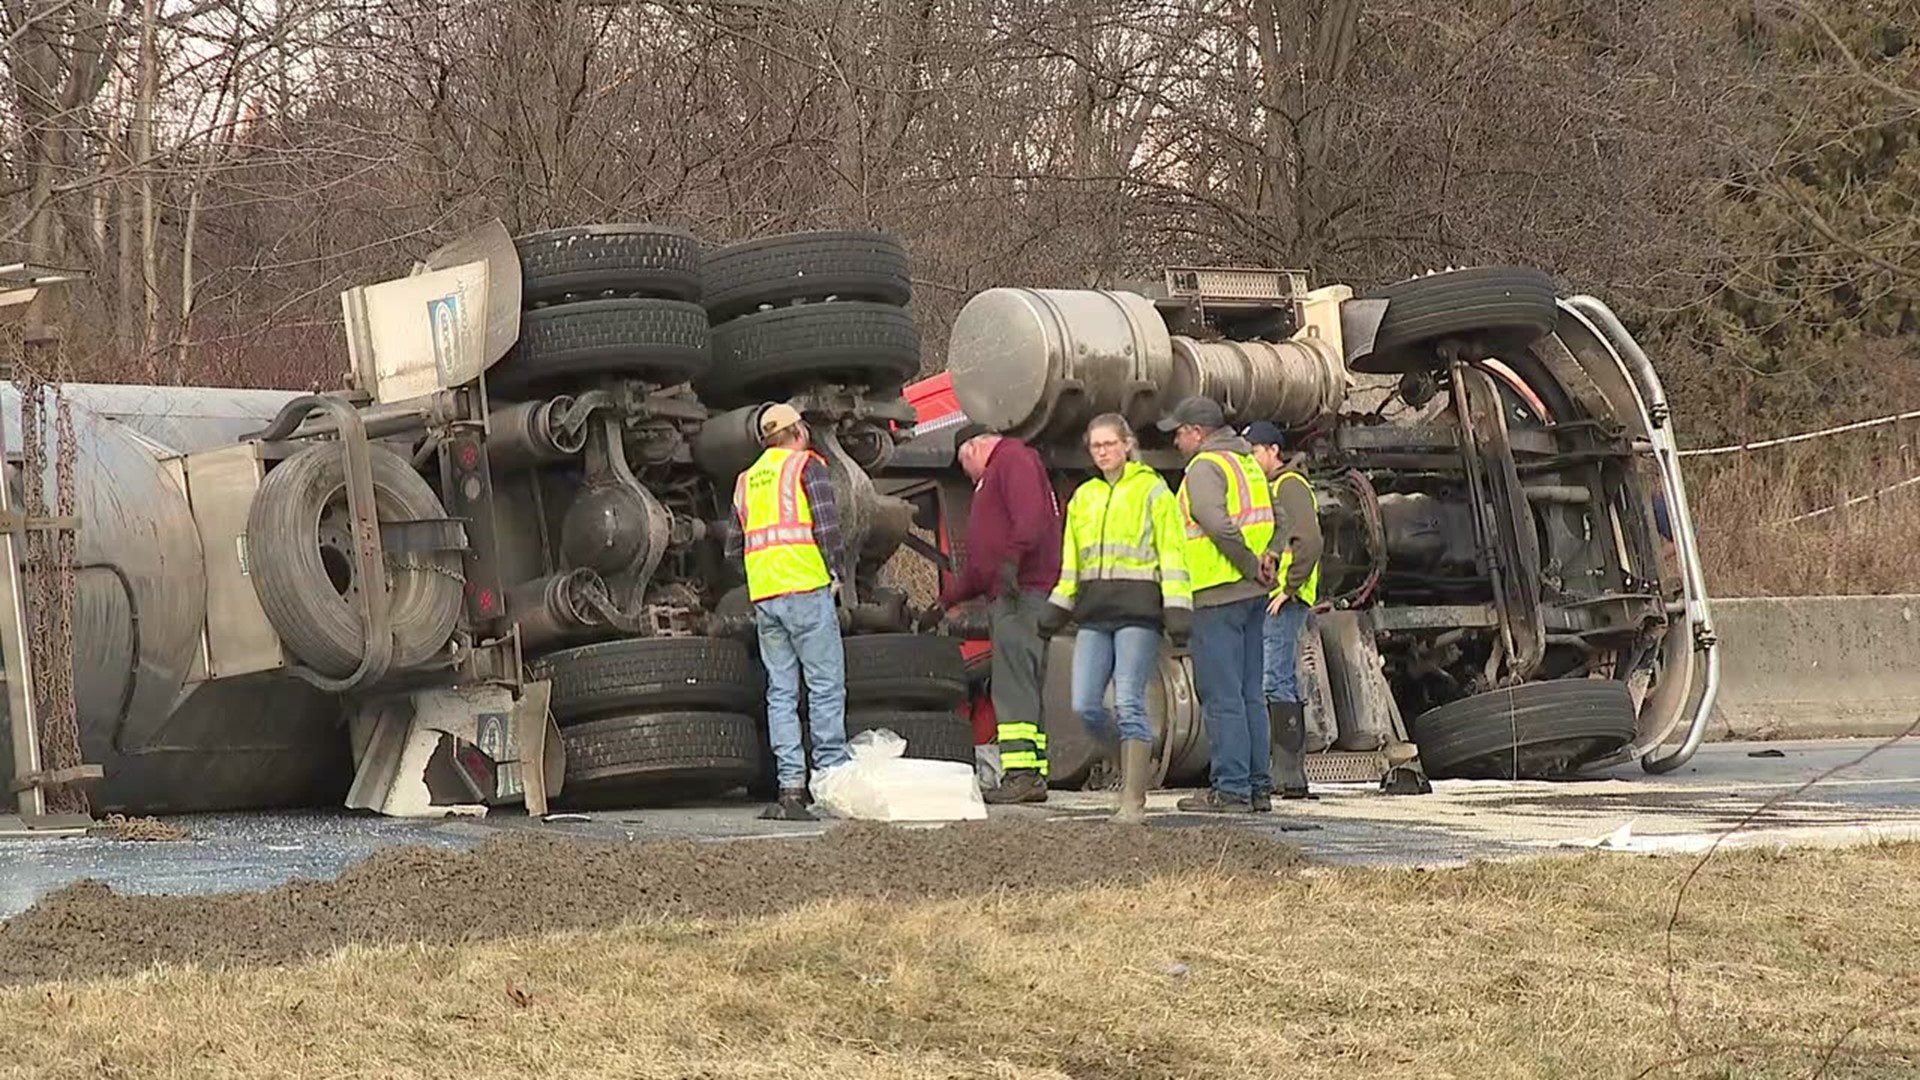 A truck carrying 50,000 pounds of milk overturned as it was getting on the Veterans Memorial Bridge.